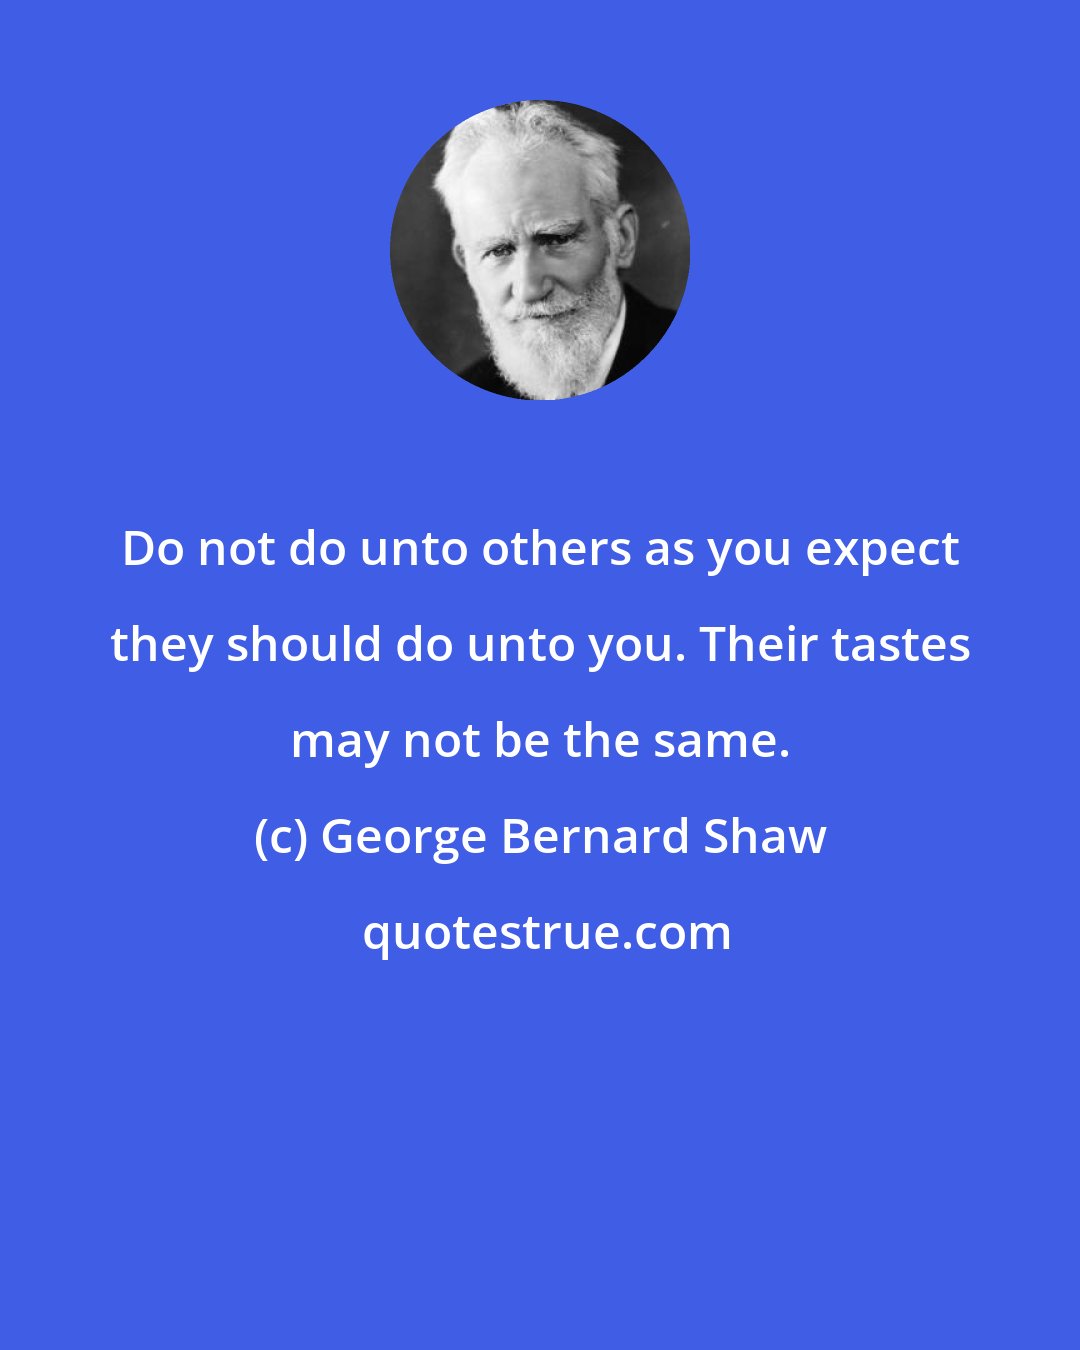 George Bernard Shaw: Do not do unto others as you expect they should do unto you. Their tastes may not be the same.